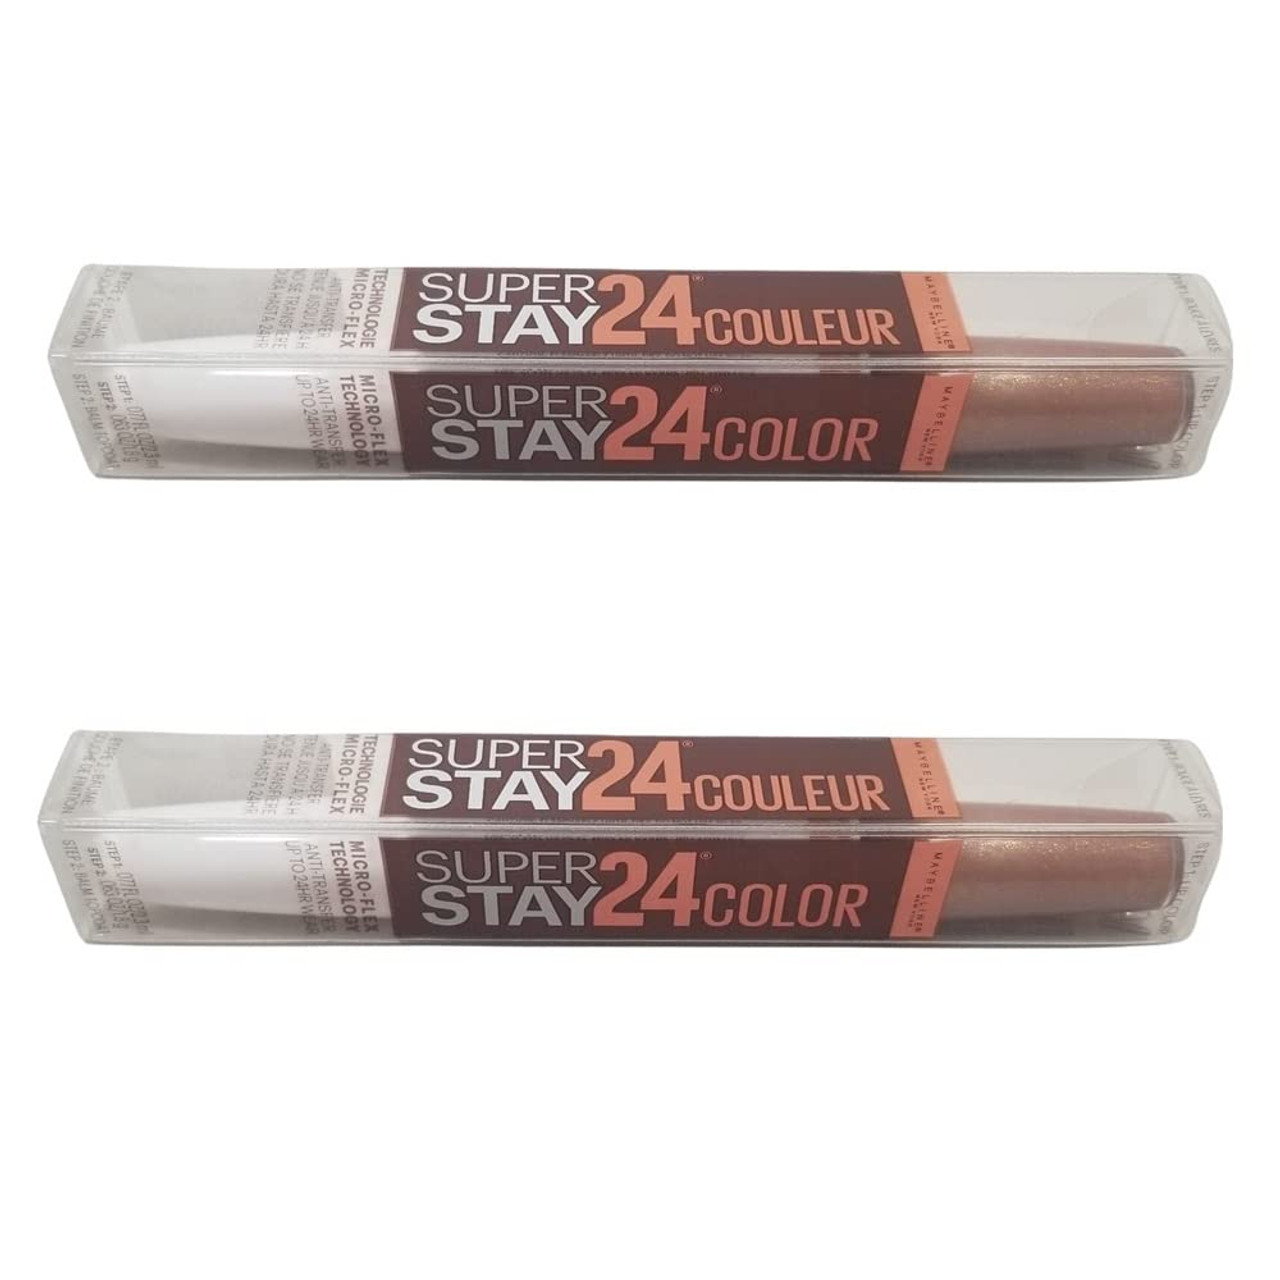 Pack of 2 Maybelline More Coffee 2Step Liquid Once Chai York 24 New SuperStay Lipstick Edition